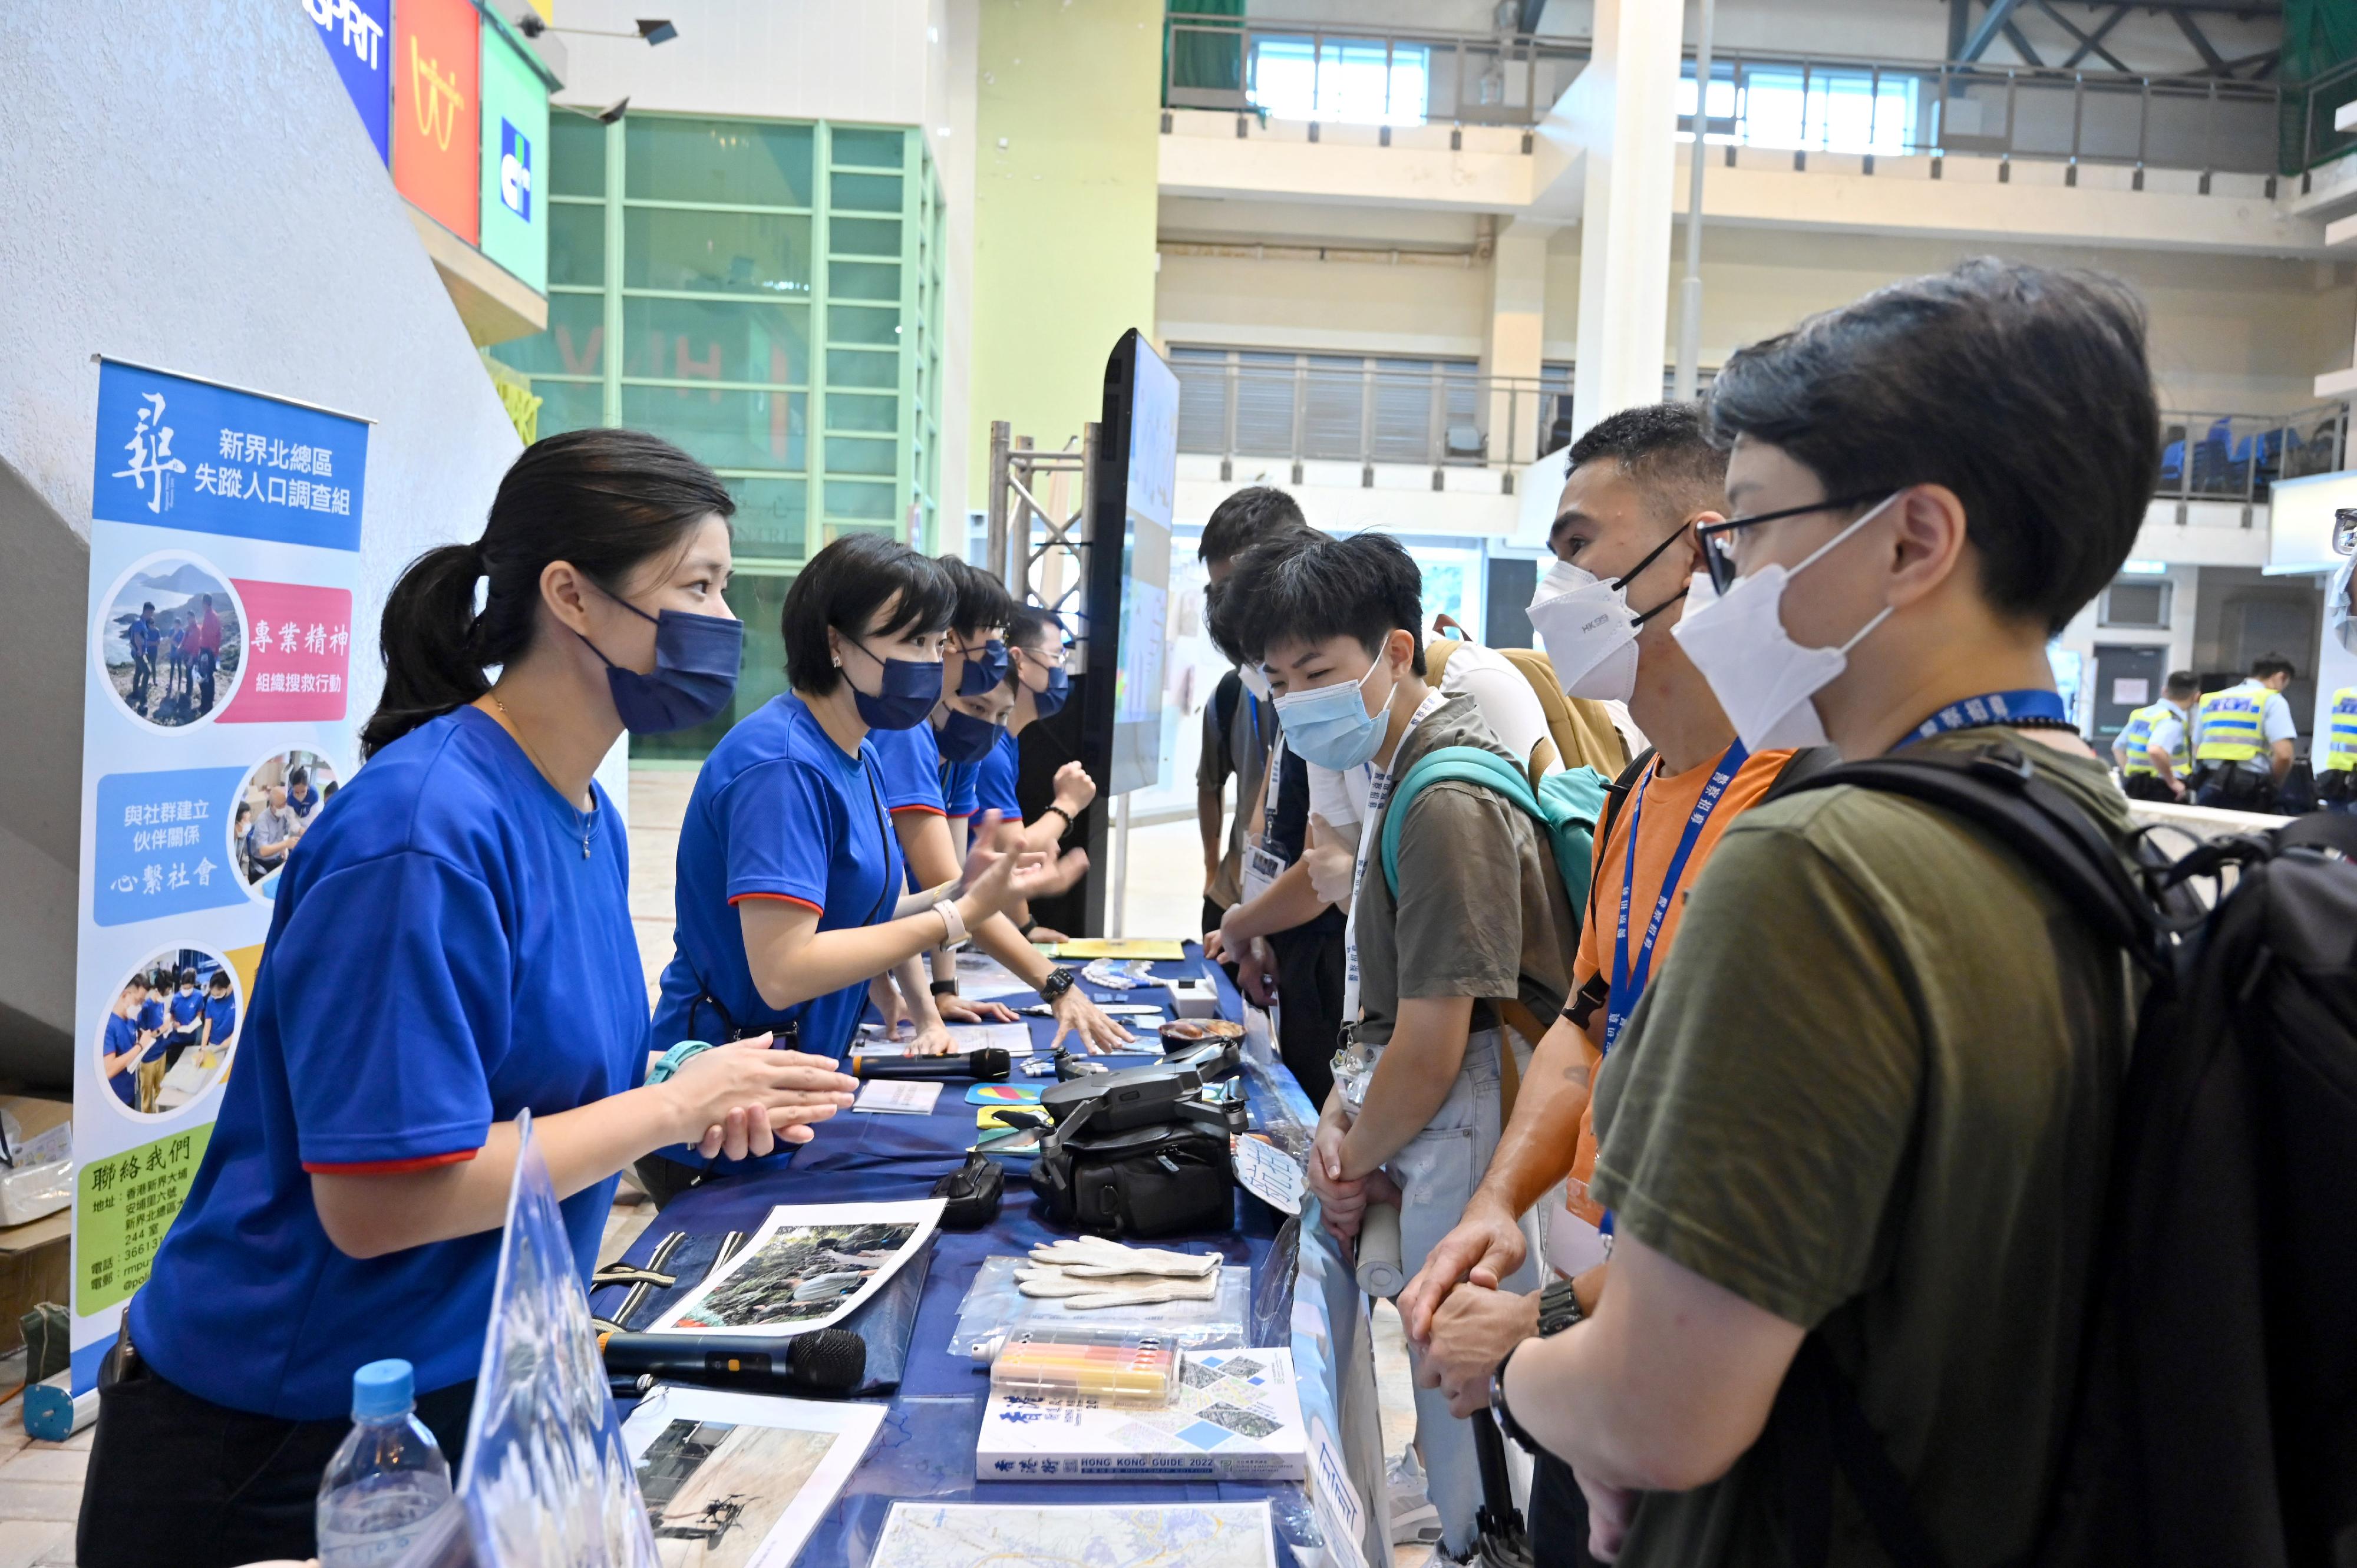 The Hong Kong Police Force today (June 19) organised the Police Recruitment Experience and Assessment Day at the Hong Kong Police College. Photo shows officers from the Missing Person Unit introducing their work to participants.